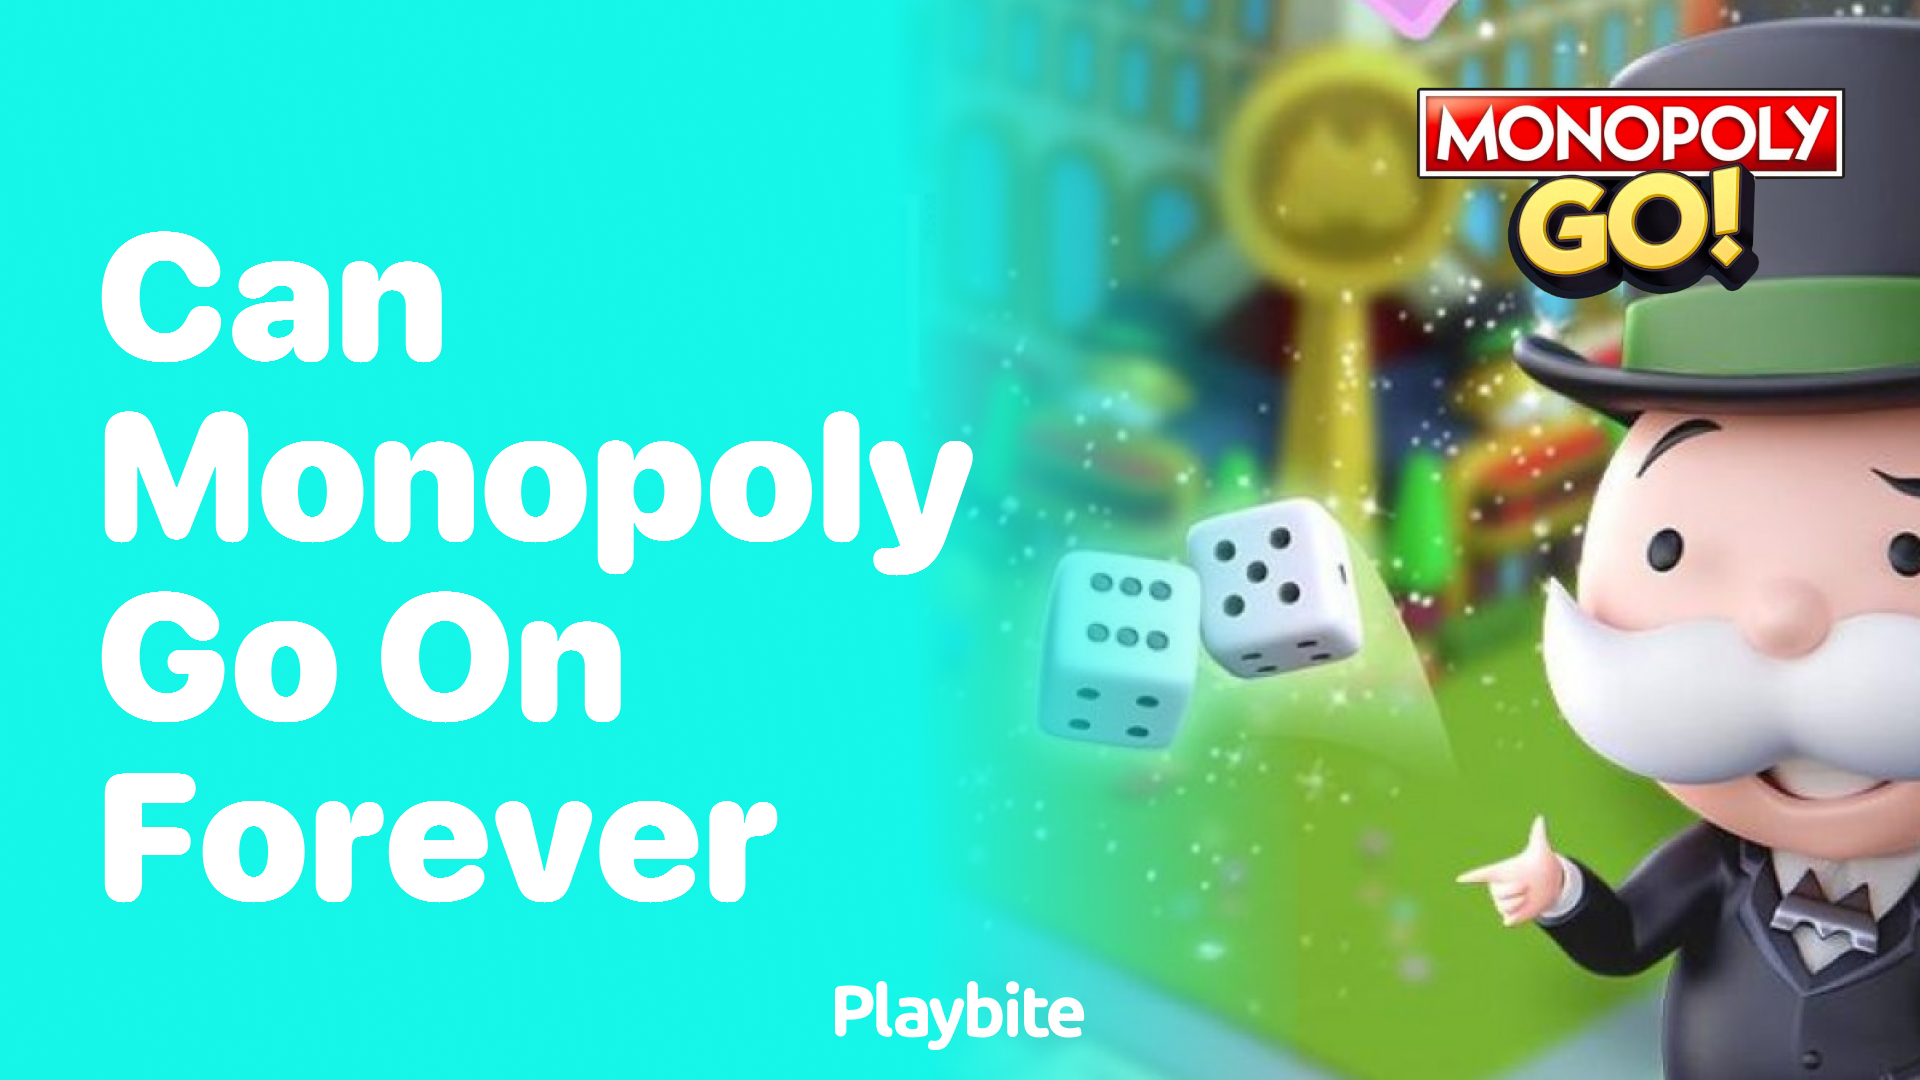 Can Monopoly Go on Forever? Unpacking the Endless Game Question